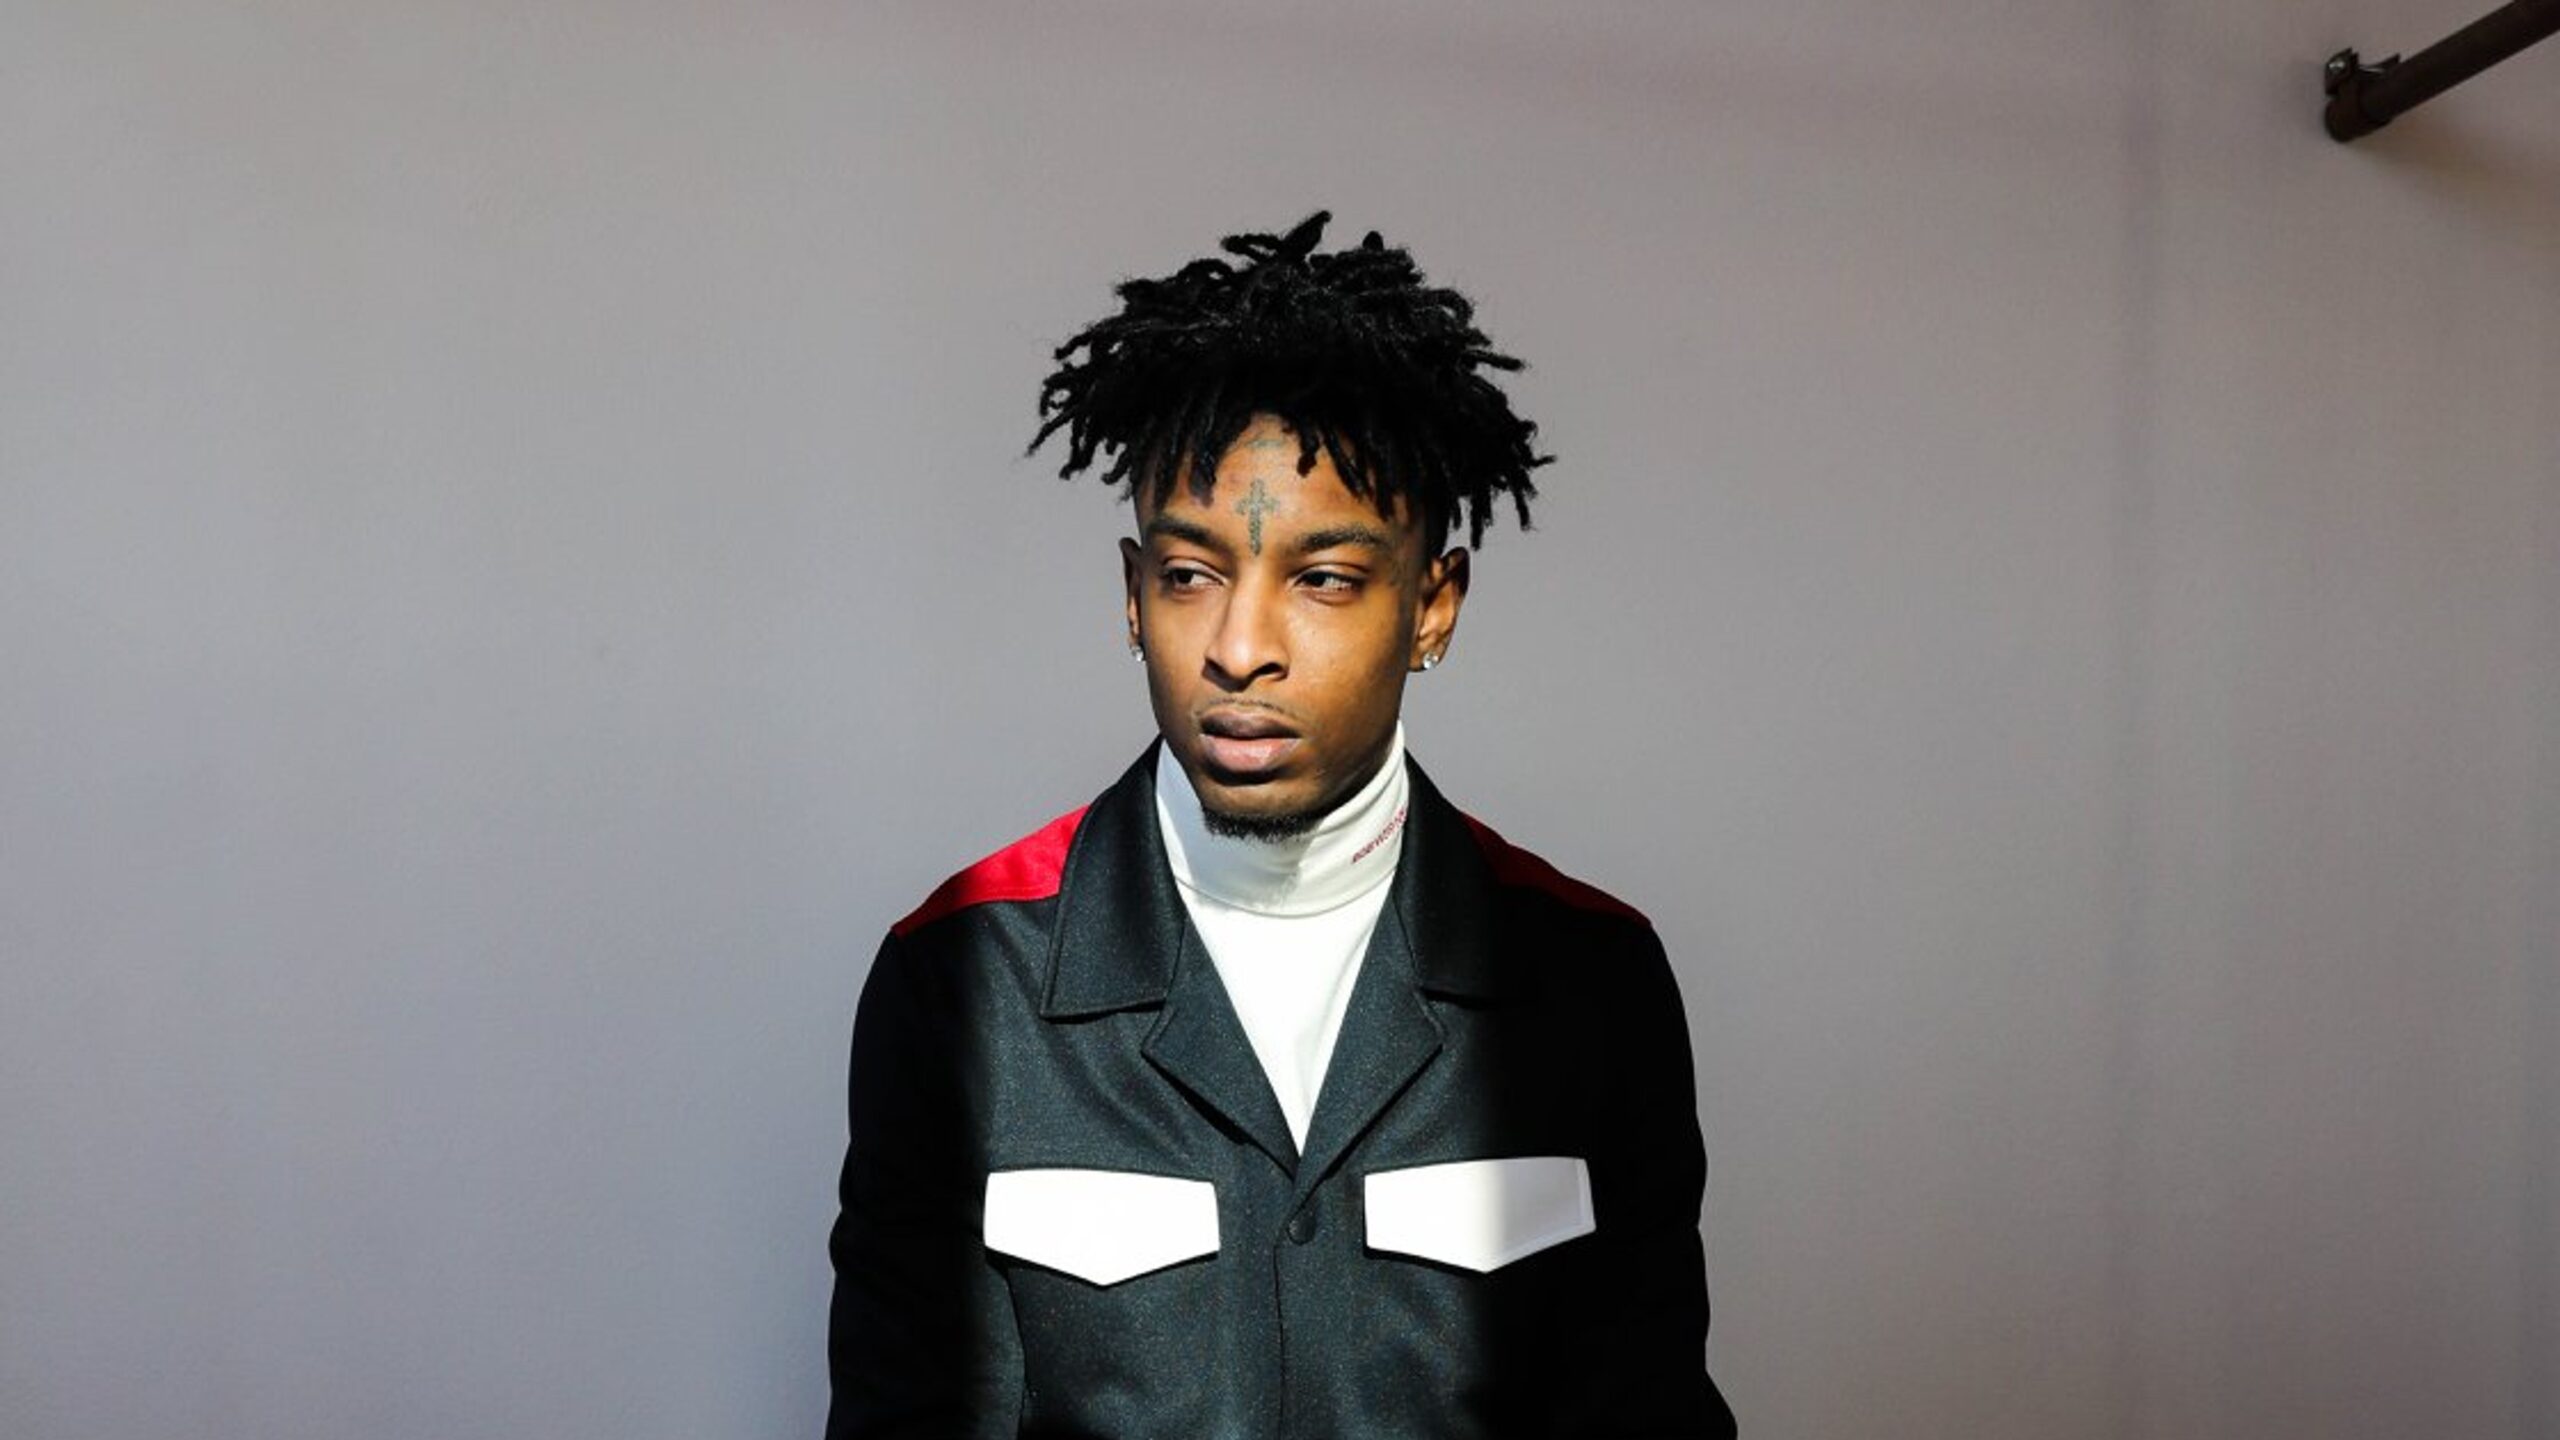 21 Savage Outfit from April 27, 2020, WHAT'S ON THE STAR?